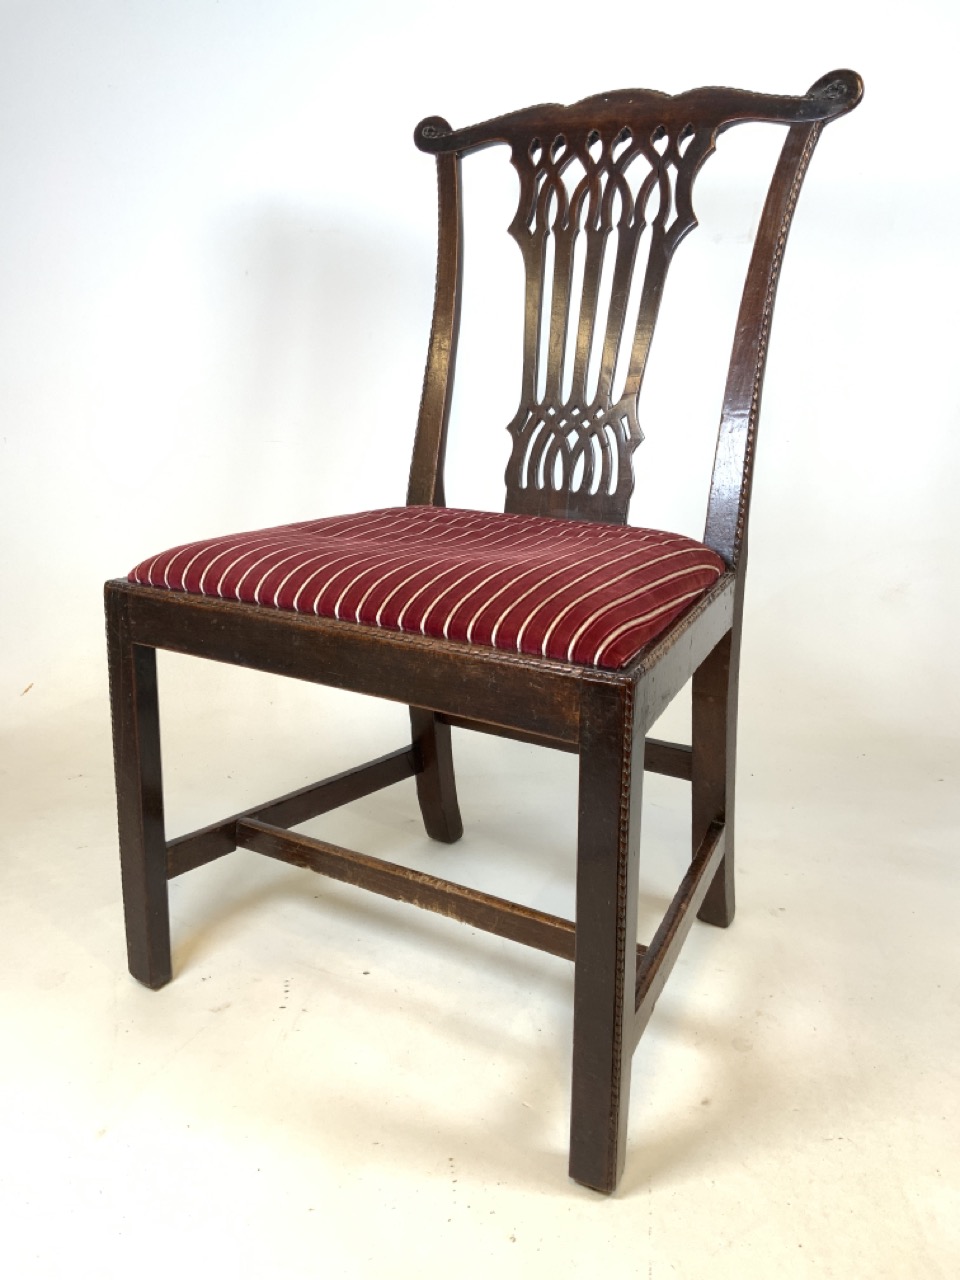 An Irish mahogany 18th century side chair with unusual rope twist carving to the edges. Seat